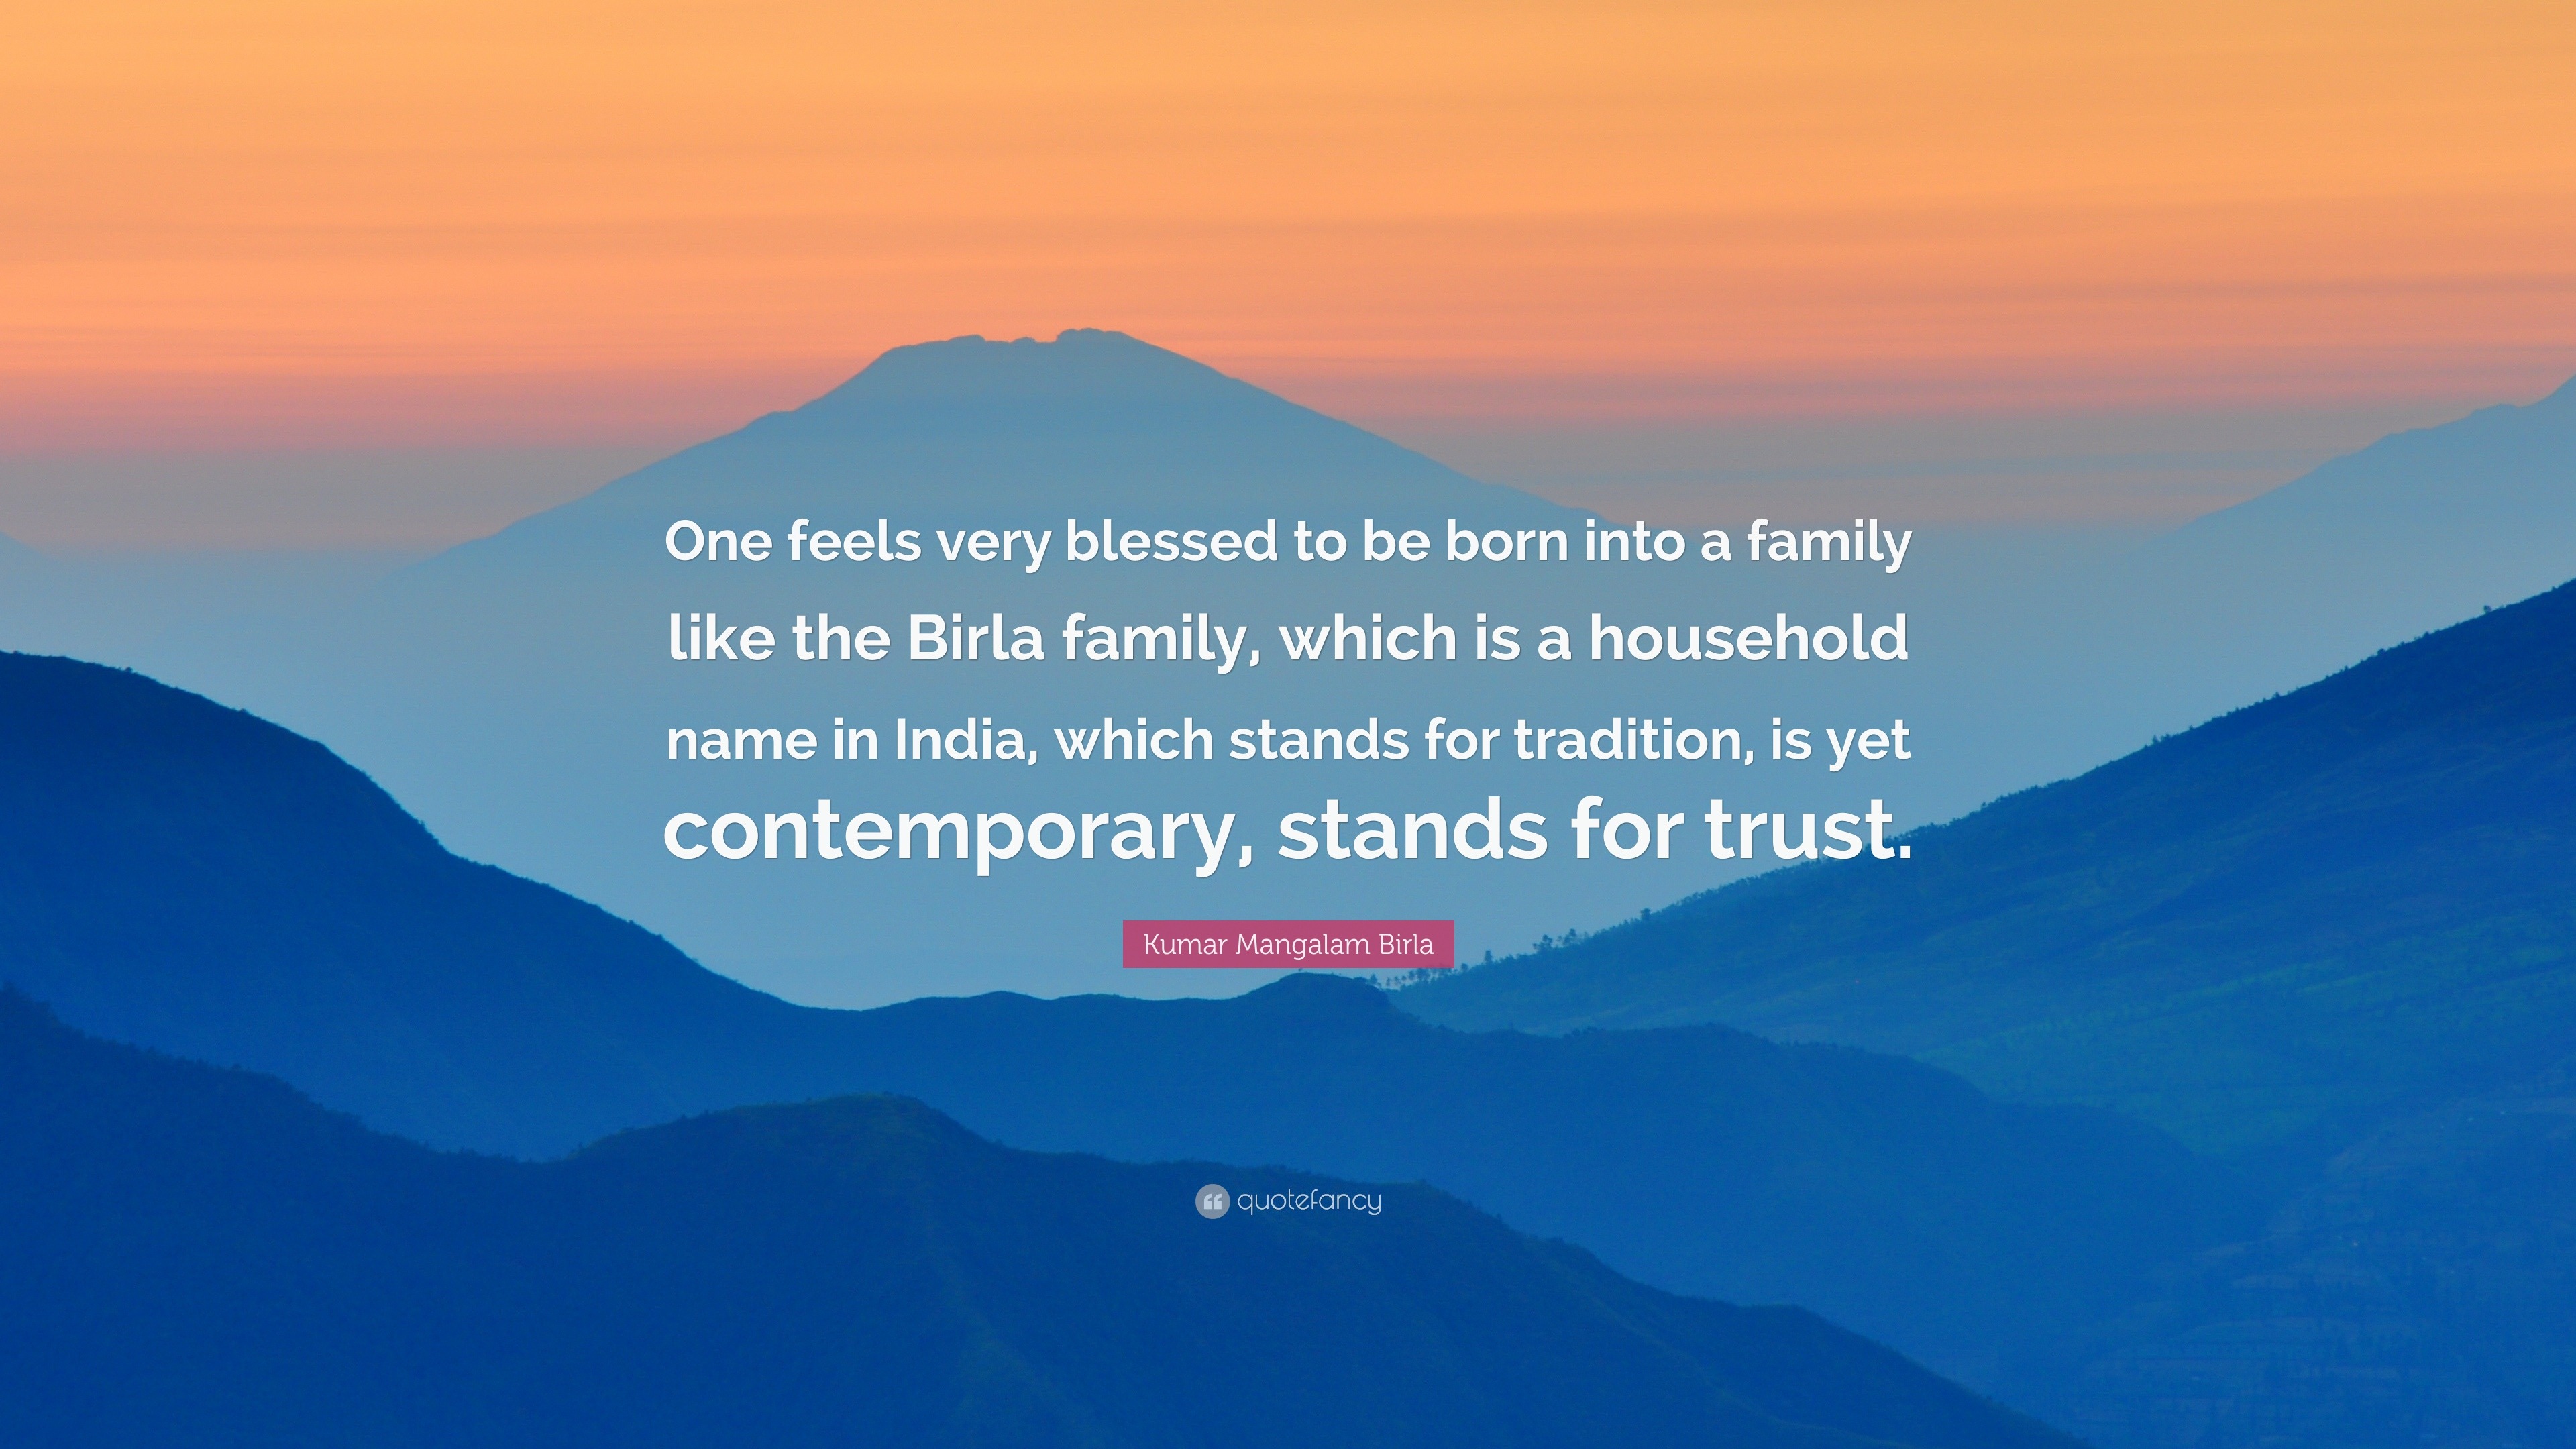 Kumar Mangalam Birla Quote: “One feels very blessed to be born into a